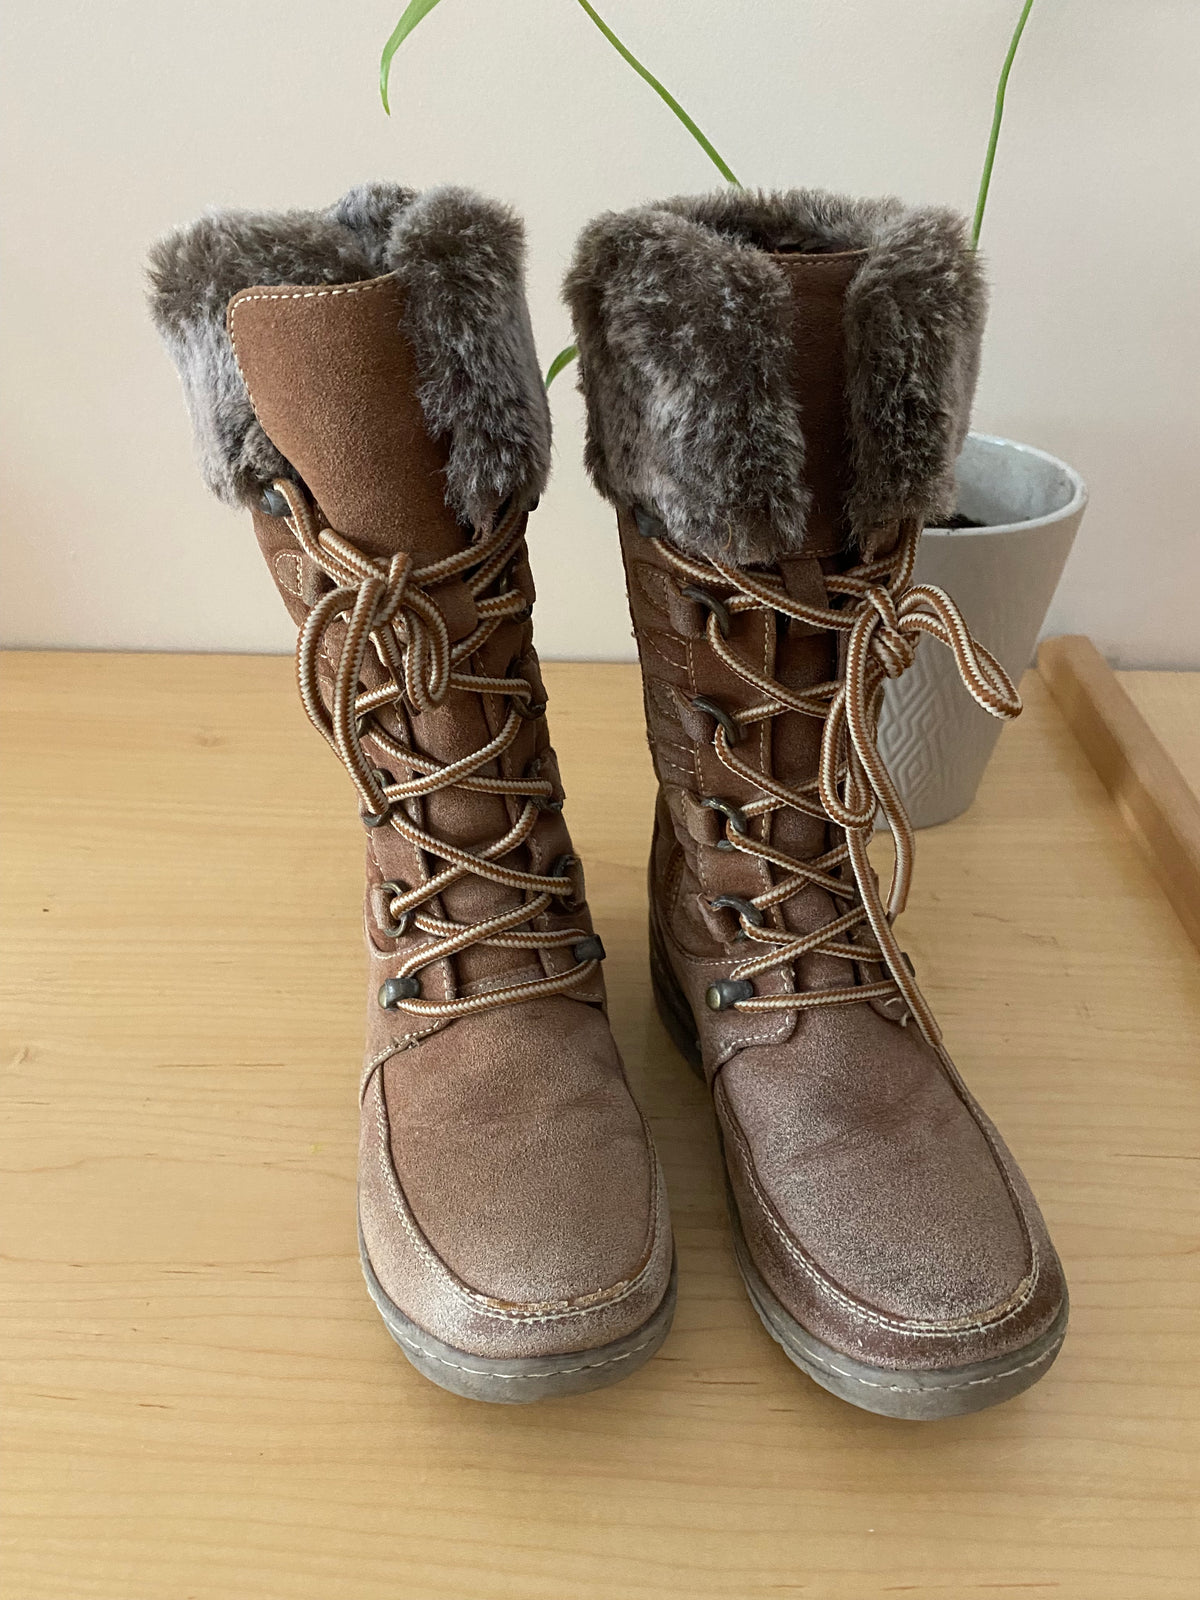 Winter Boots (Size 13)